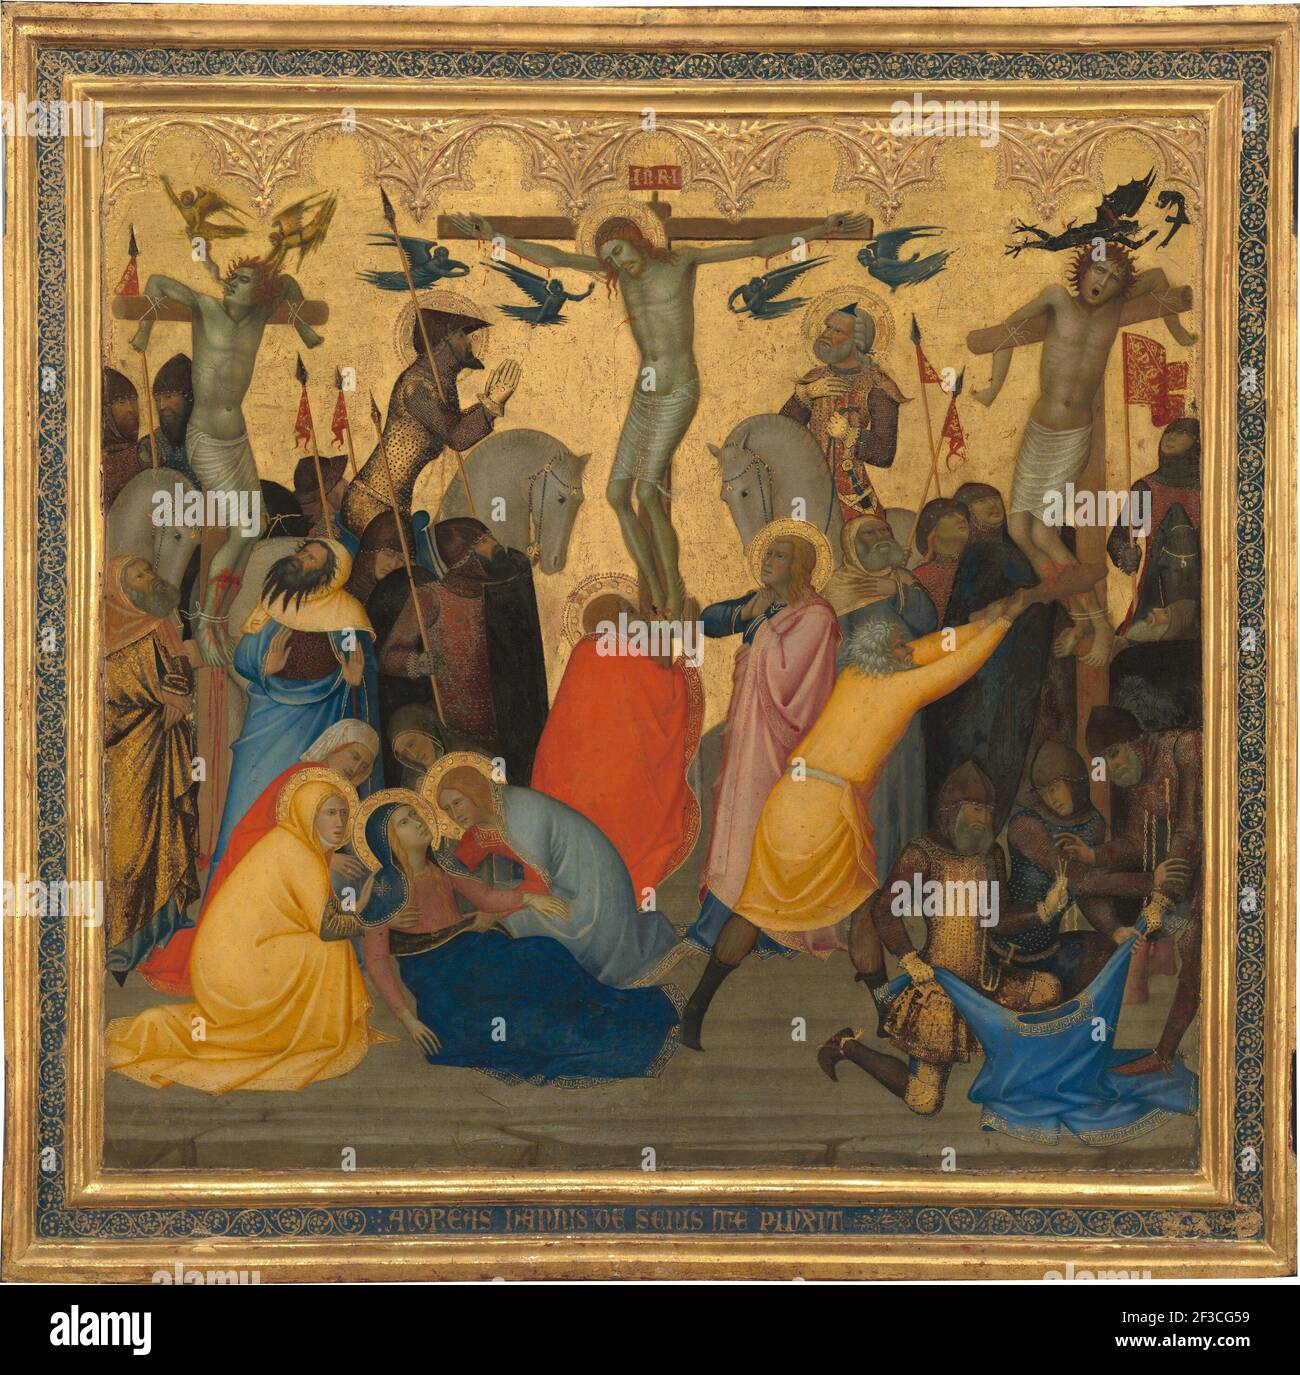 Scenes from the Passion of Christ: The Crucifixion [middle panel], 1380s. Stock Photo